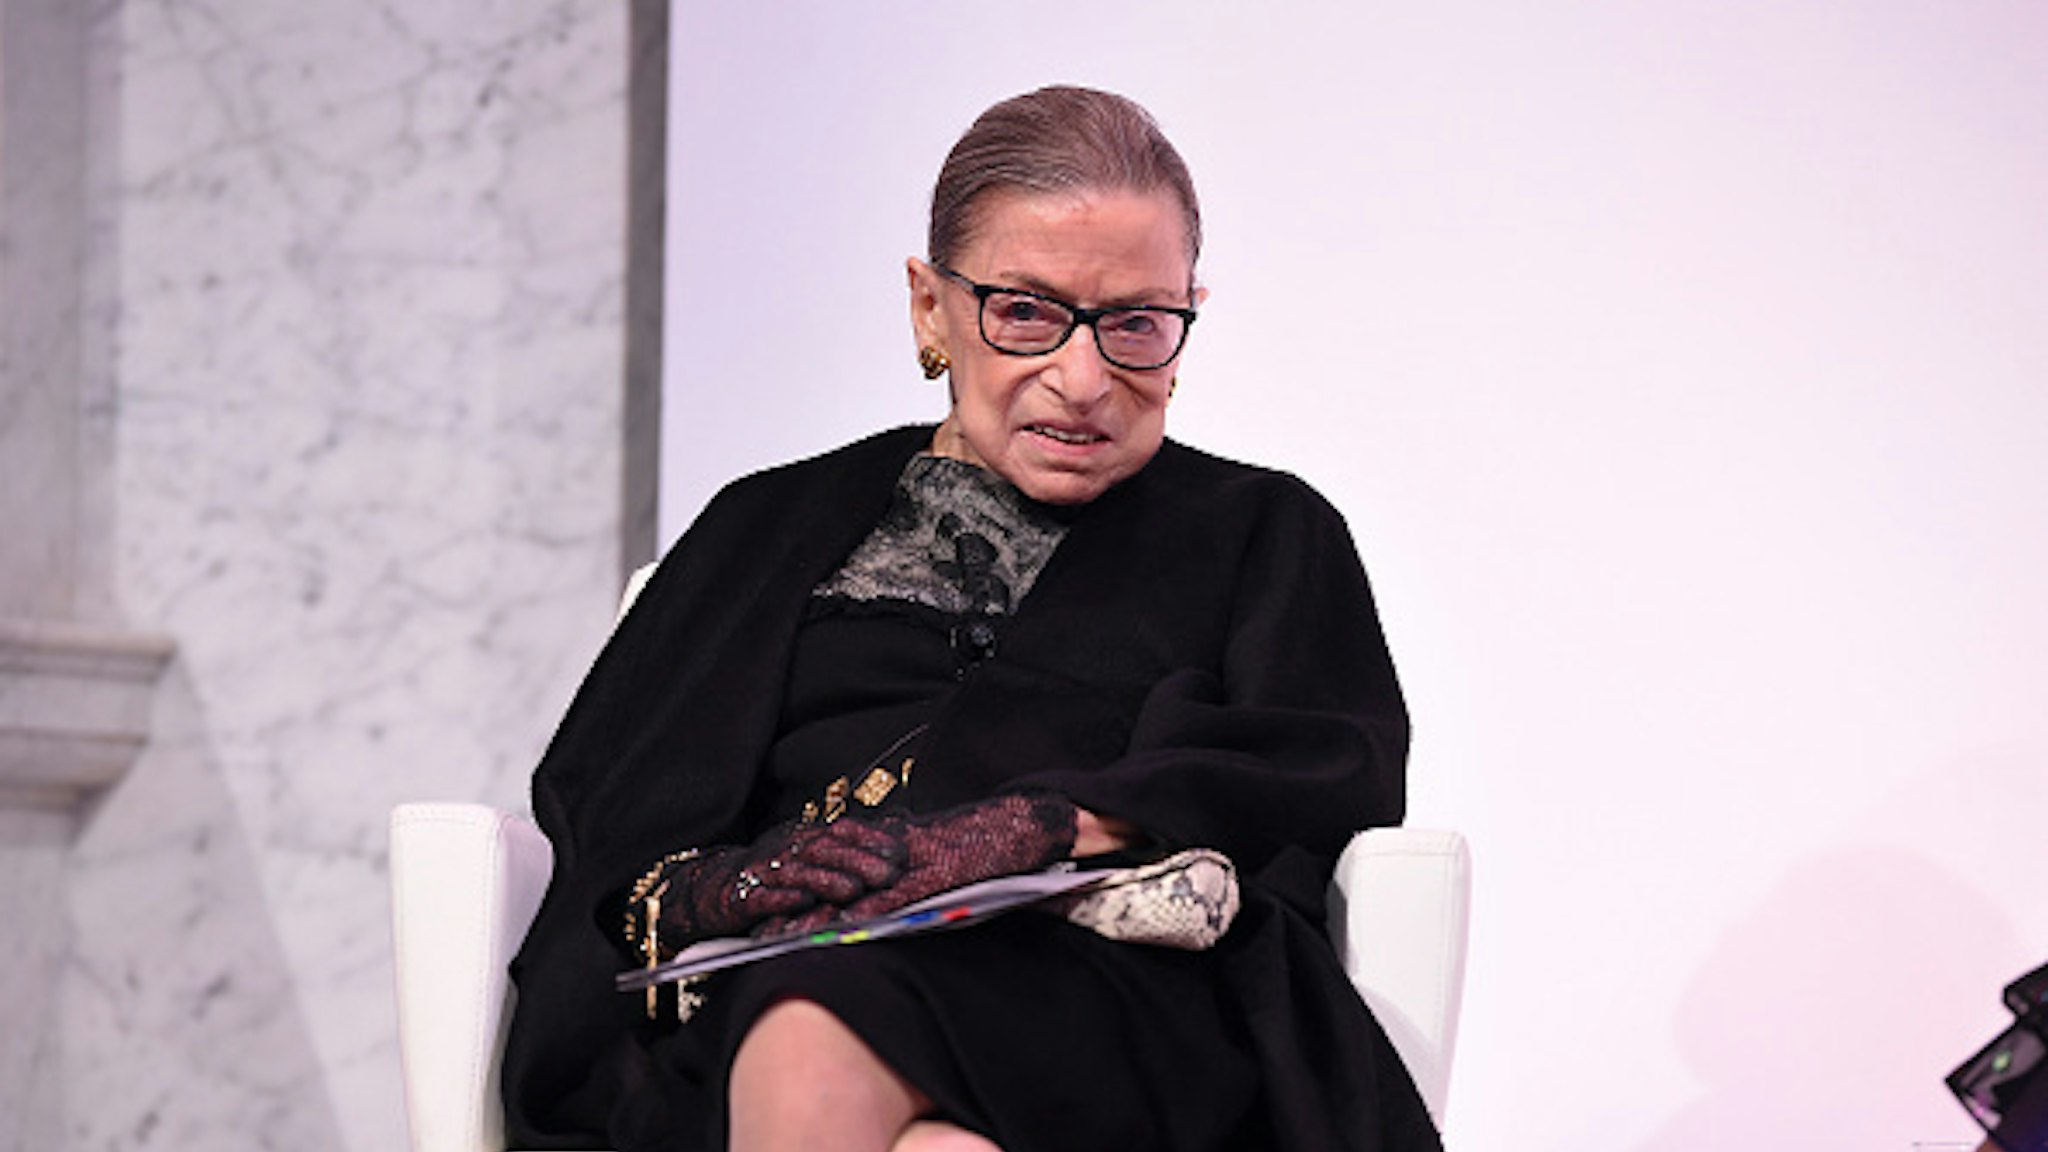 Supreme Court Justice Ruth Bader Ginsburg at the 2020 DVF Awards on February 19, 2020 in Washington, DC.